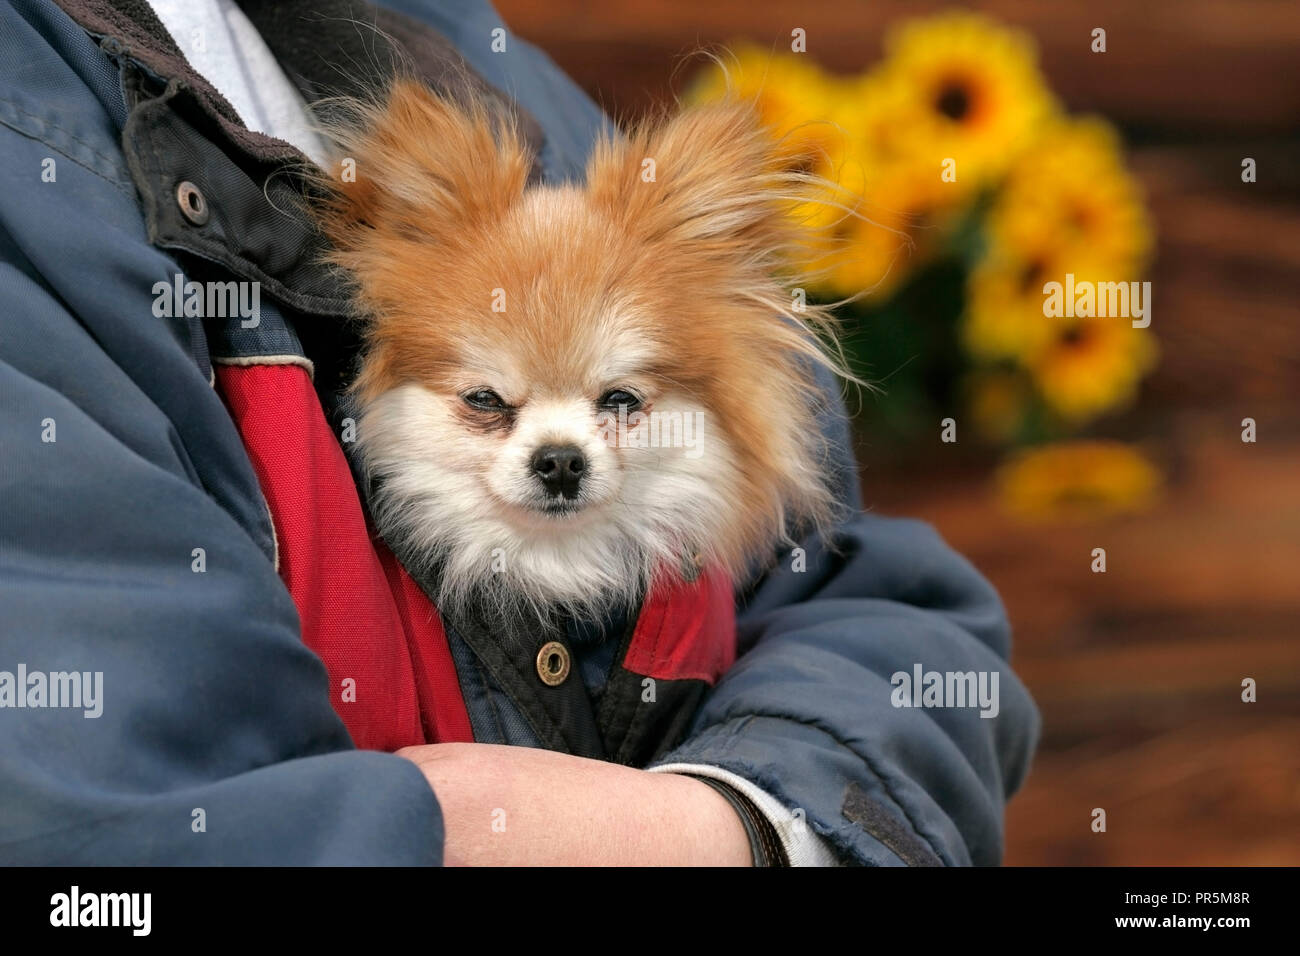 Cute Pomeranian Dog carried in jacket, peaking out. Stock Photo